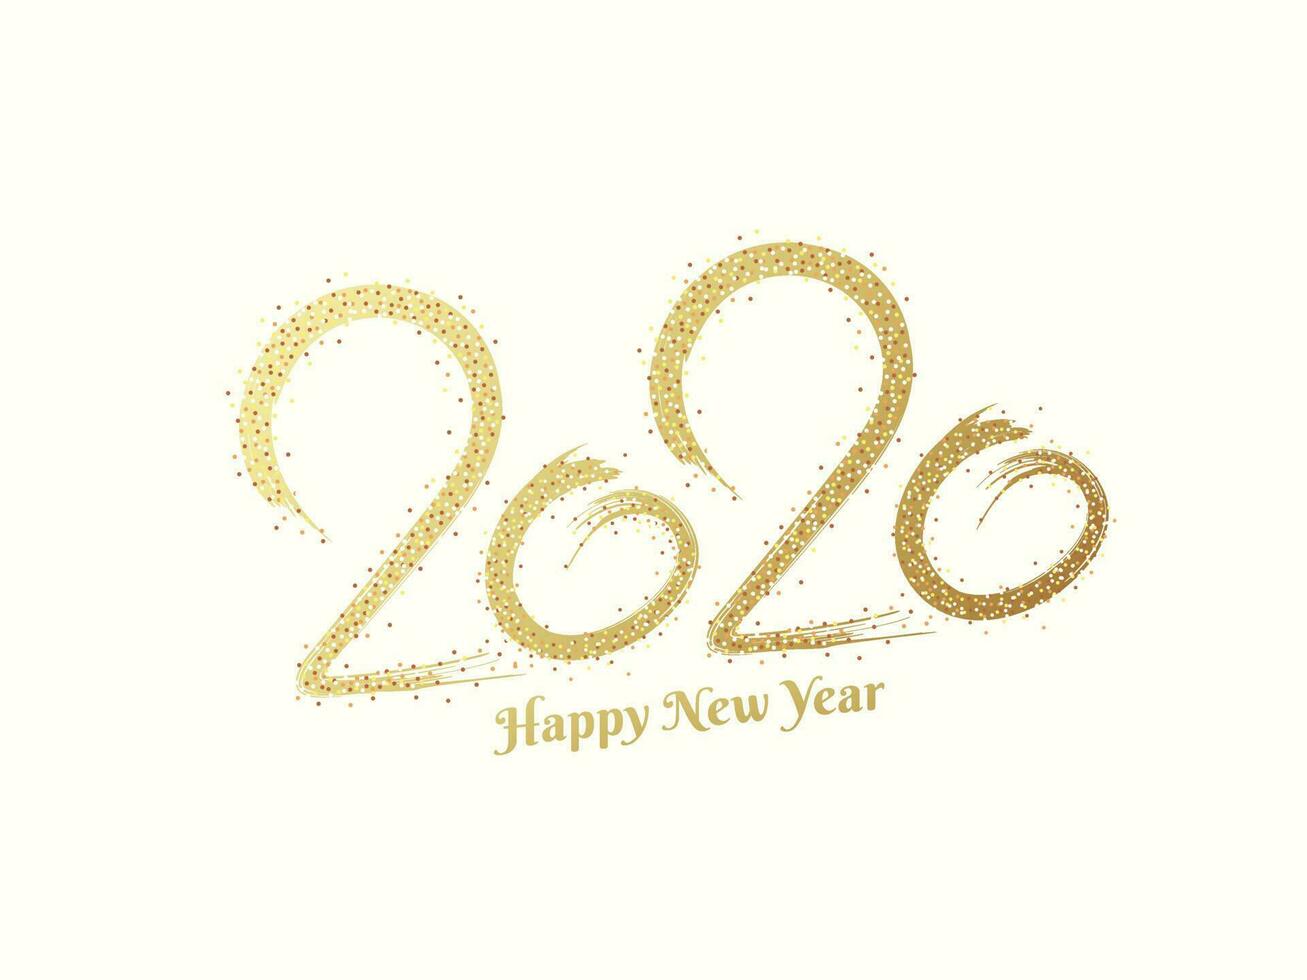 2020 text in glitter brush stroke effect on white background for Happy New Year greeting card design. vector